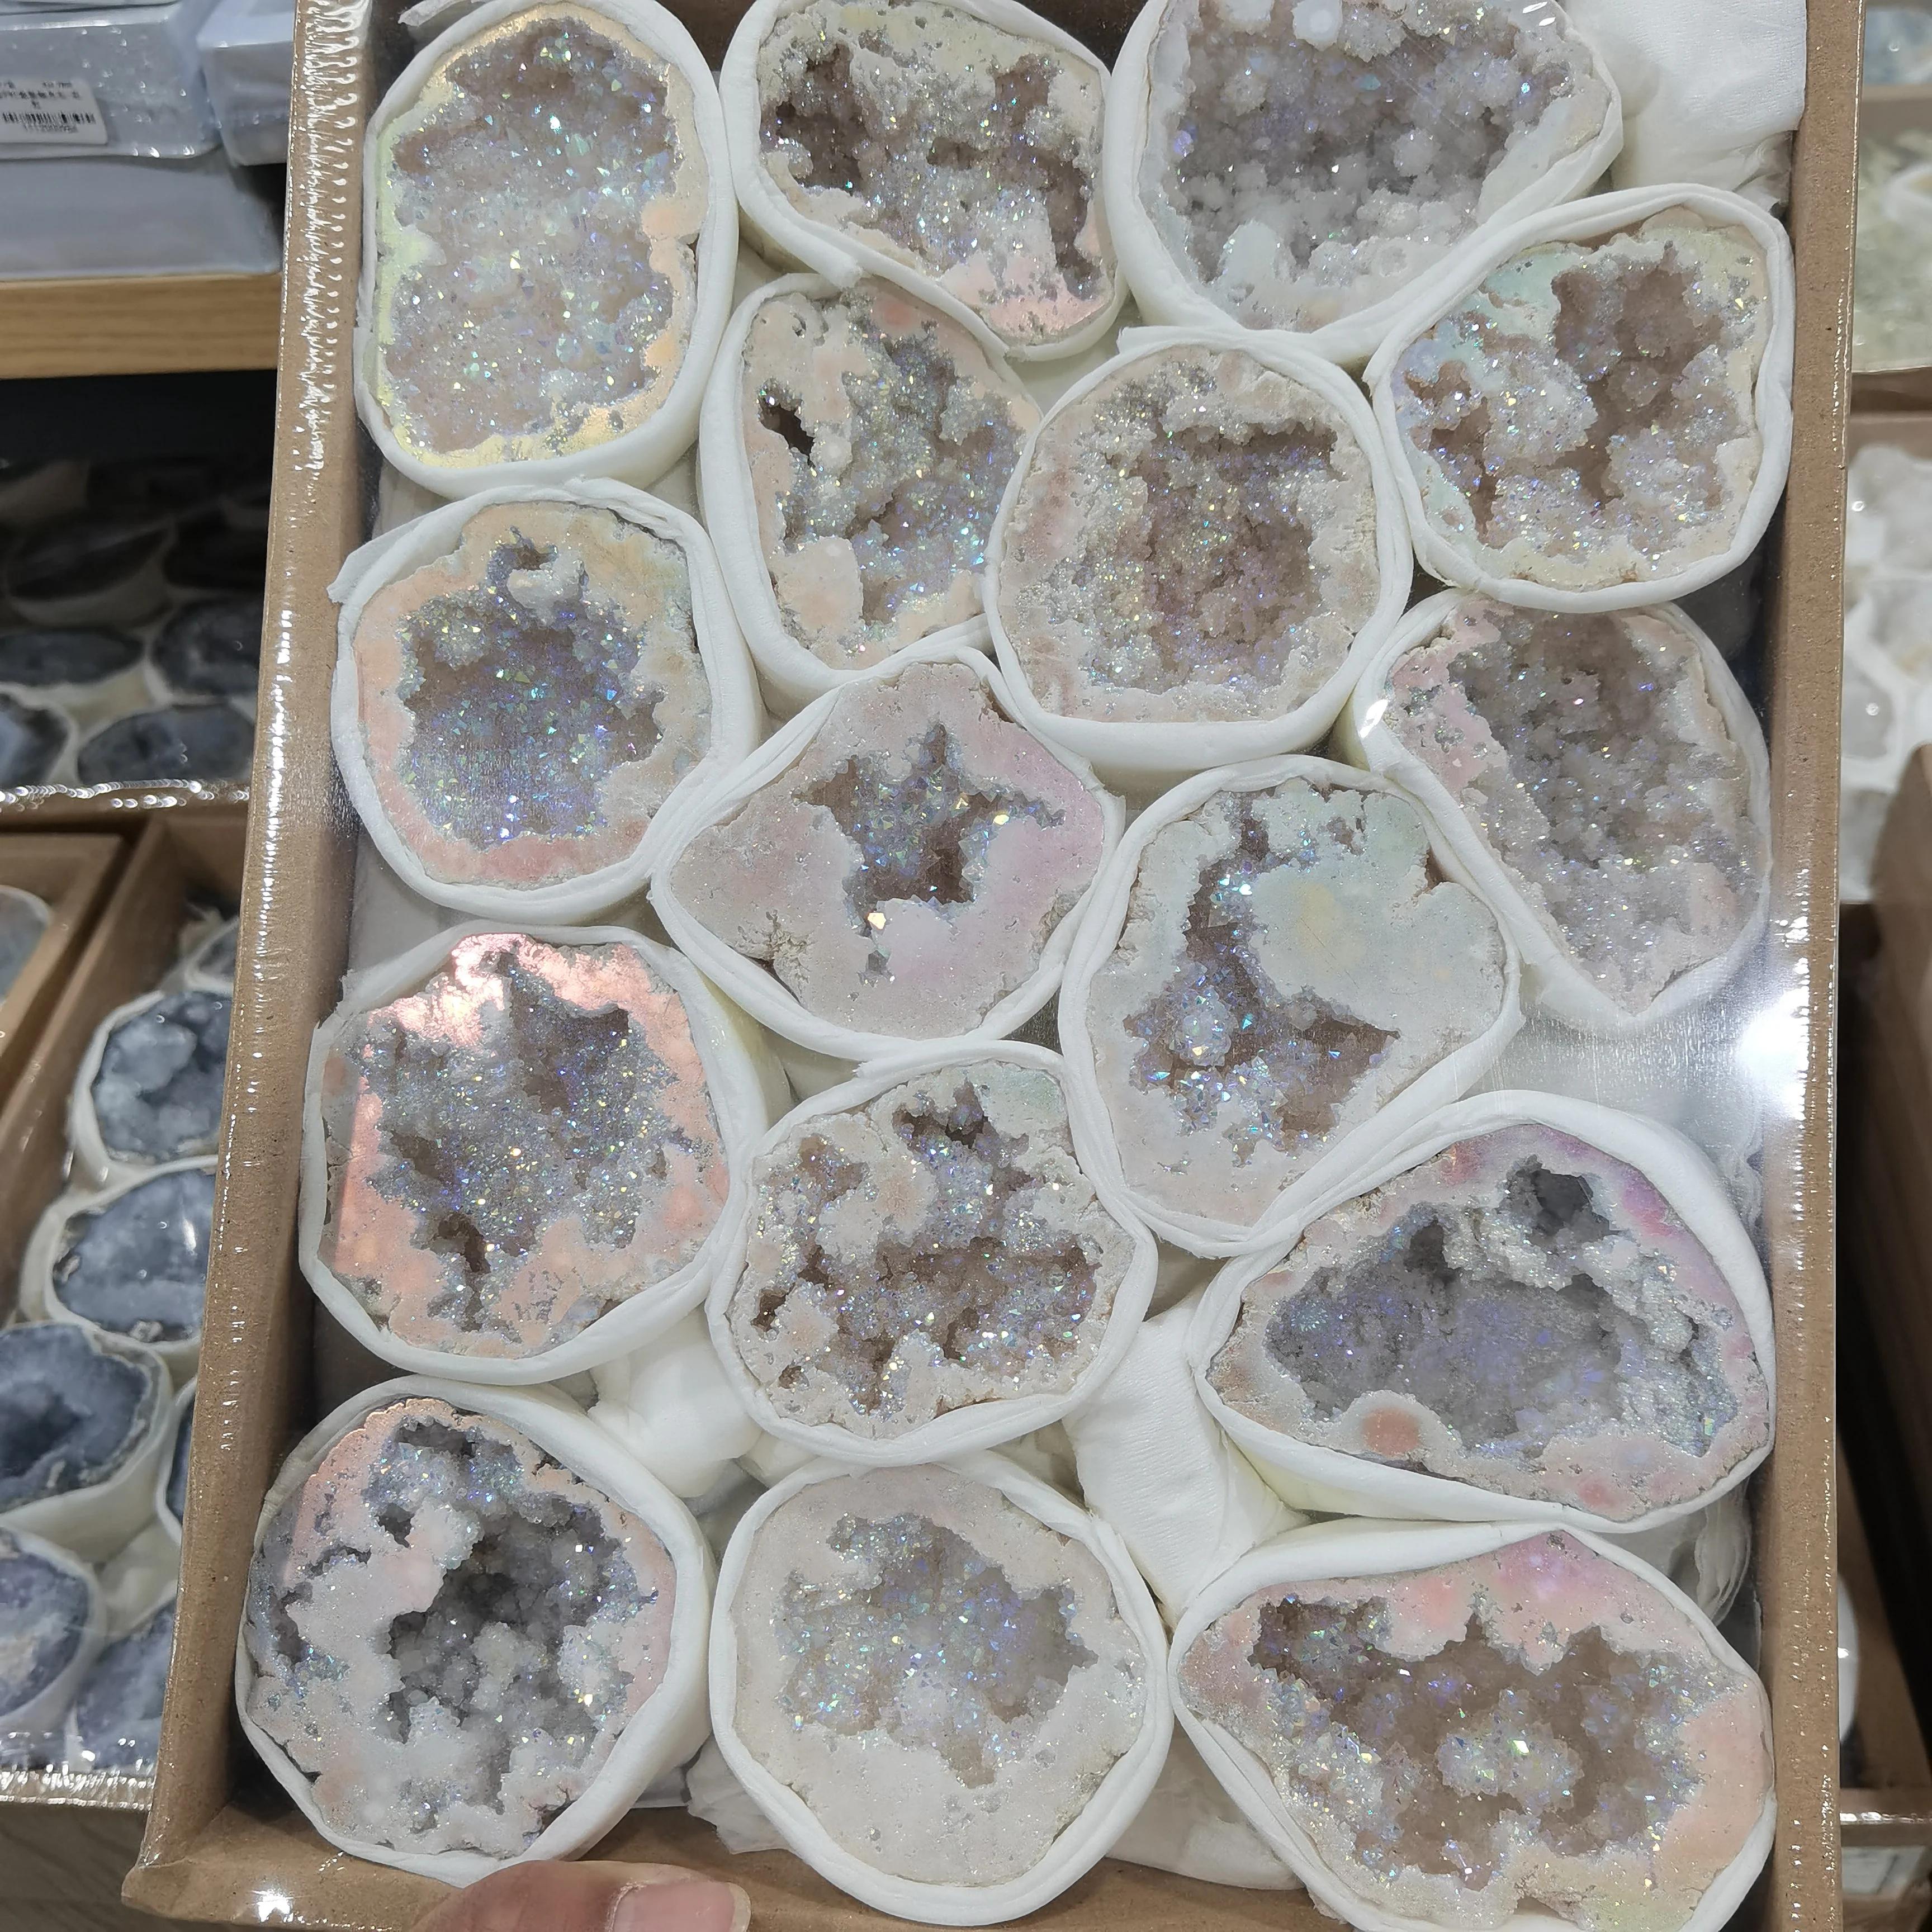 

A box of 16 pieces Natural Whole Hollow Agate Mineral Specimen Healing Quartz Agate Stone Geode Ore Home Decor DIY Gift